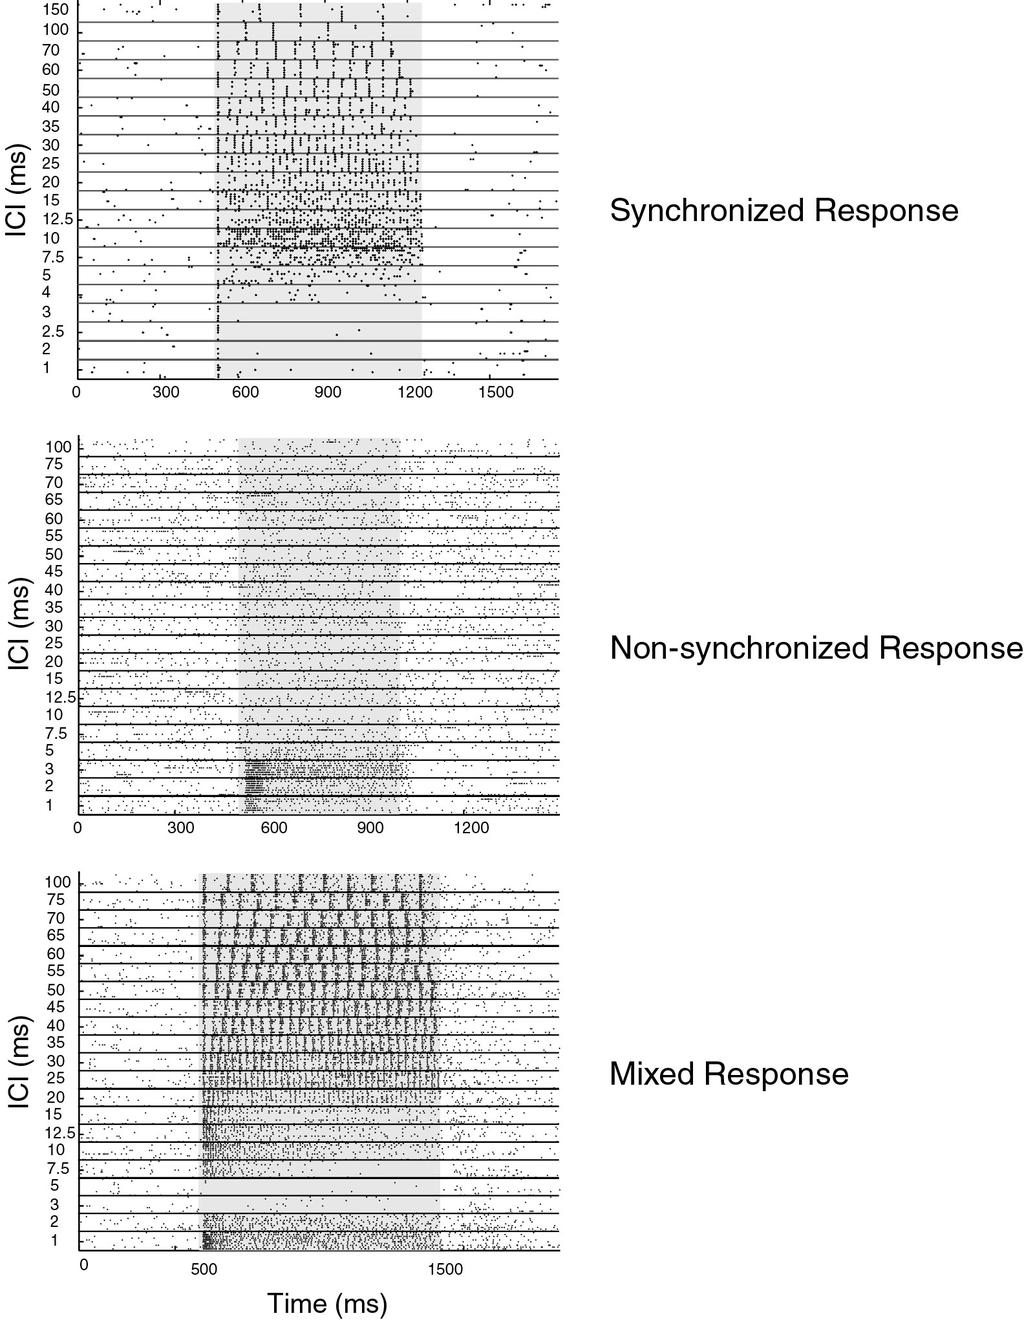 Non-synchronized responses also observed in